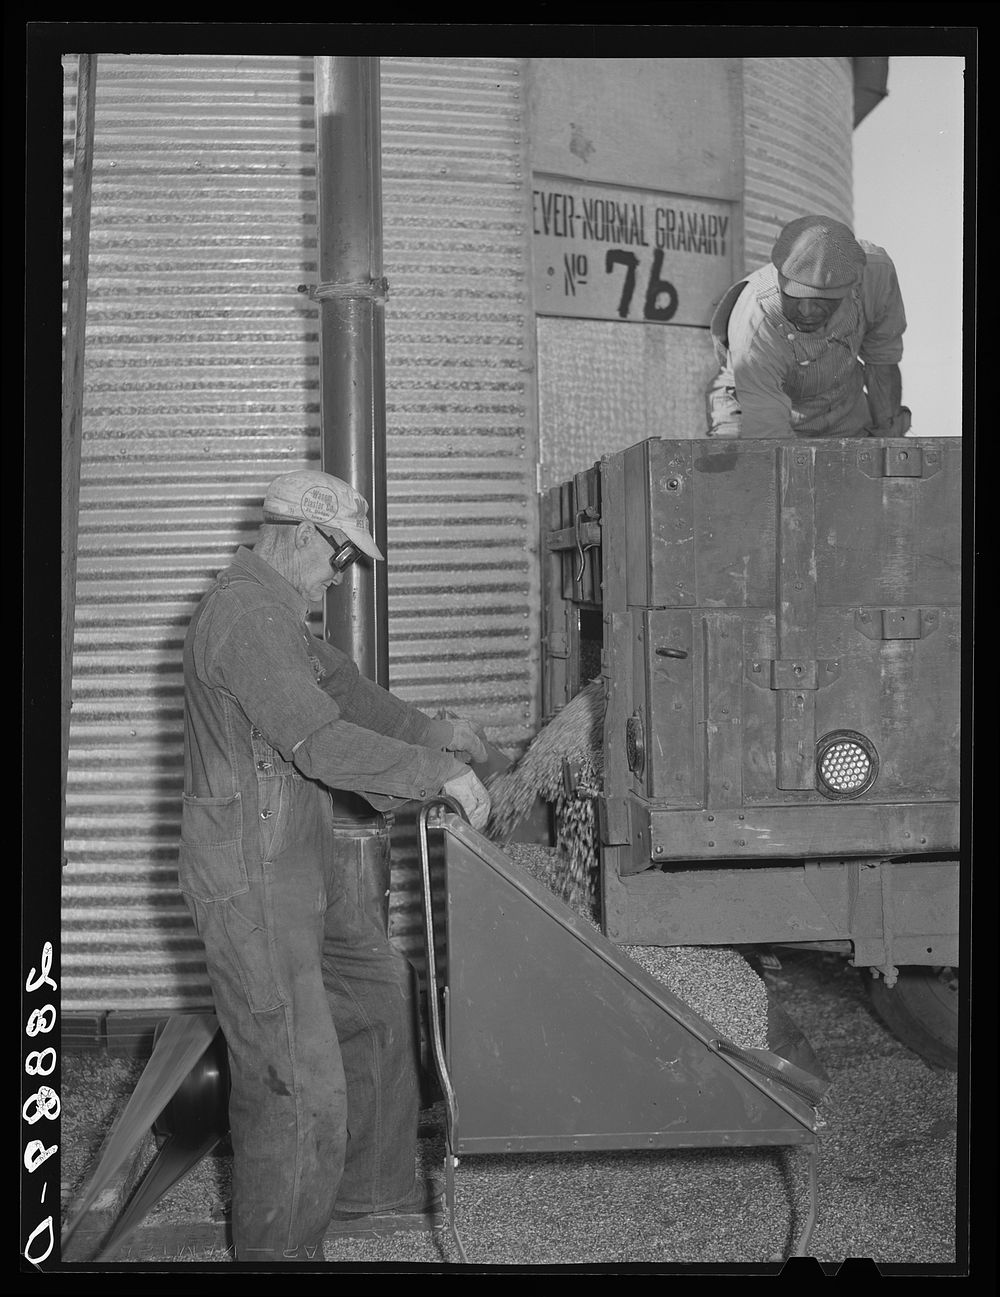 Storing corn in ever-normal granary bin. Grundy Center, Iowa. Sourced from the Library of Congress.